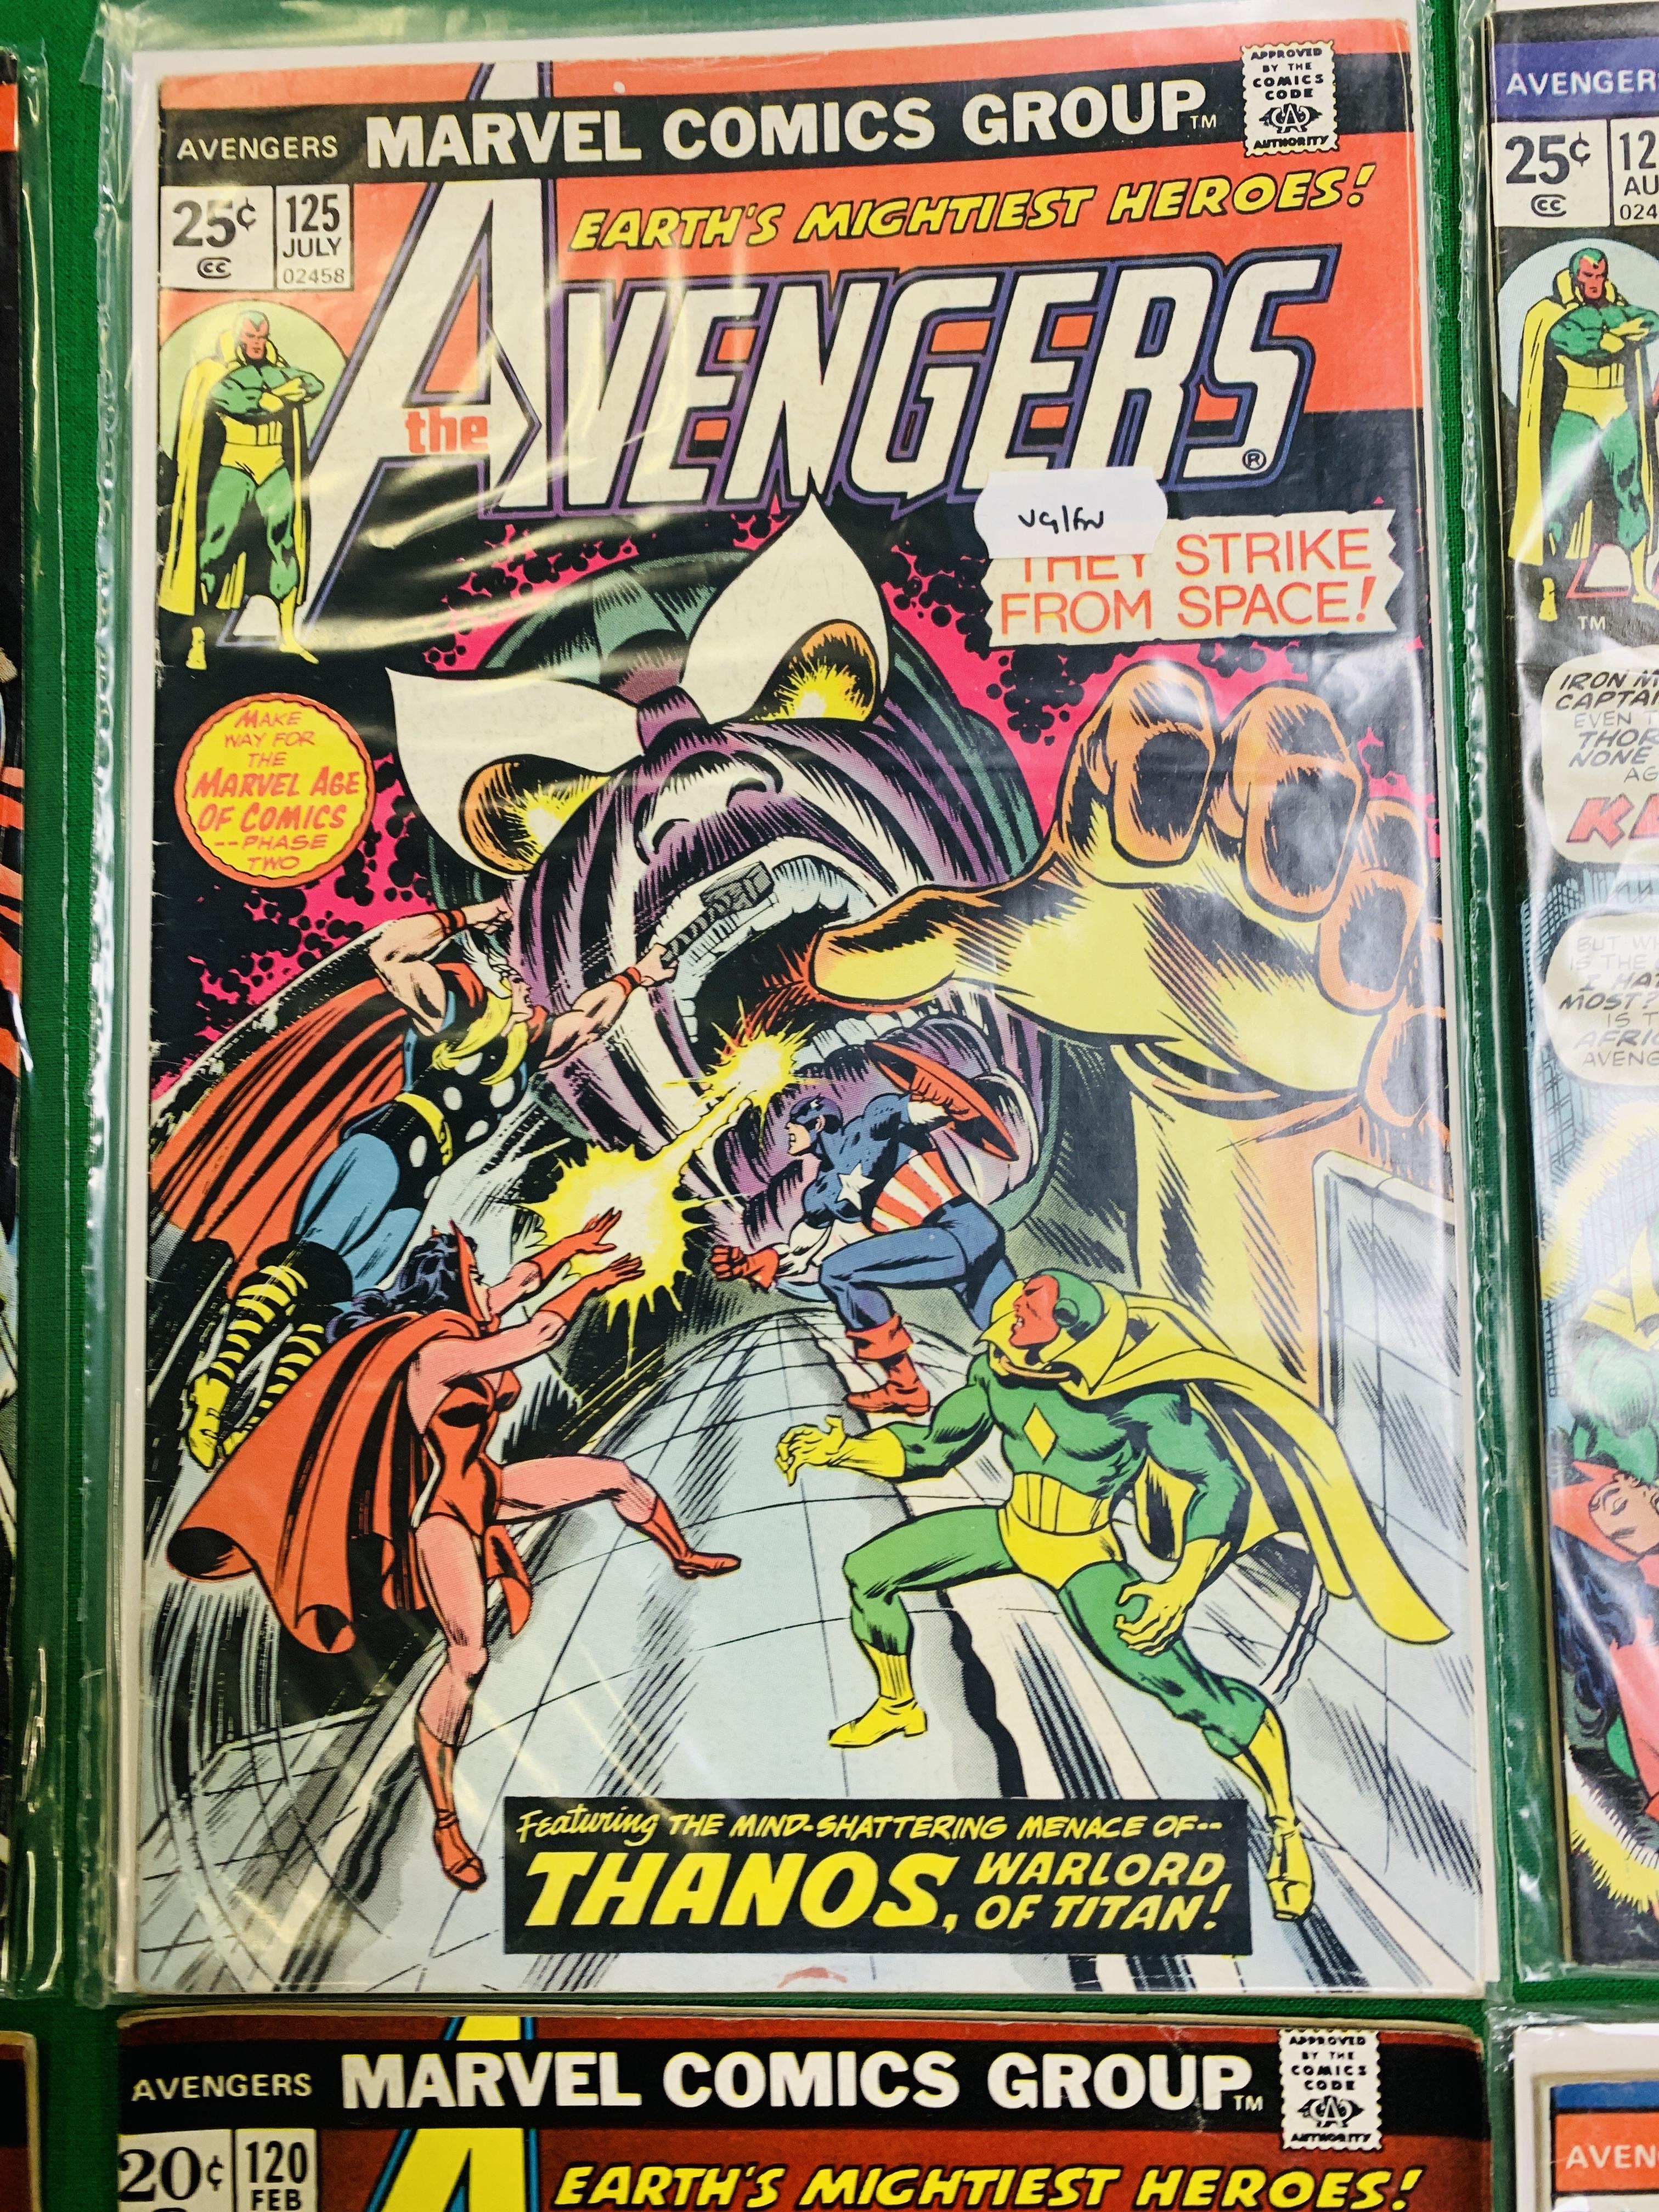 MARVEL COMICS THE AVENGERS NO. 101 - 299, MISSING ISSUES 103 AND 110. - Image 14 of 130